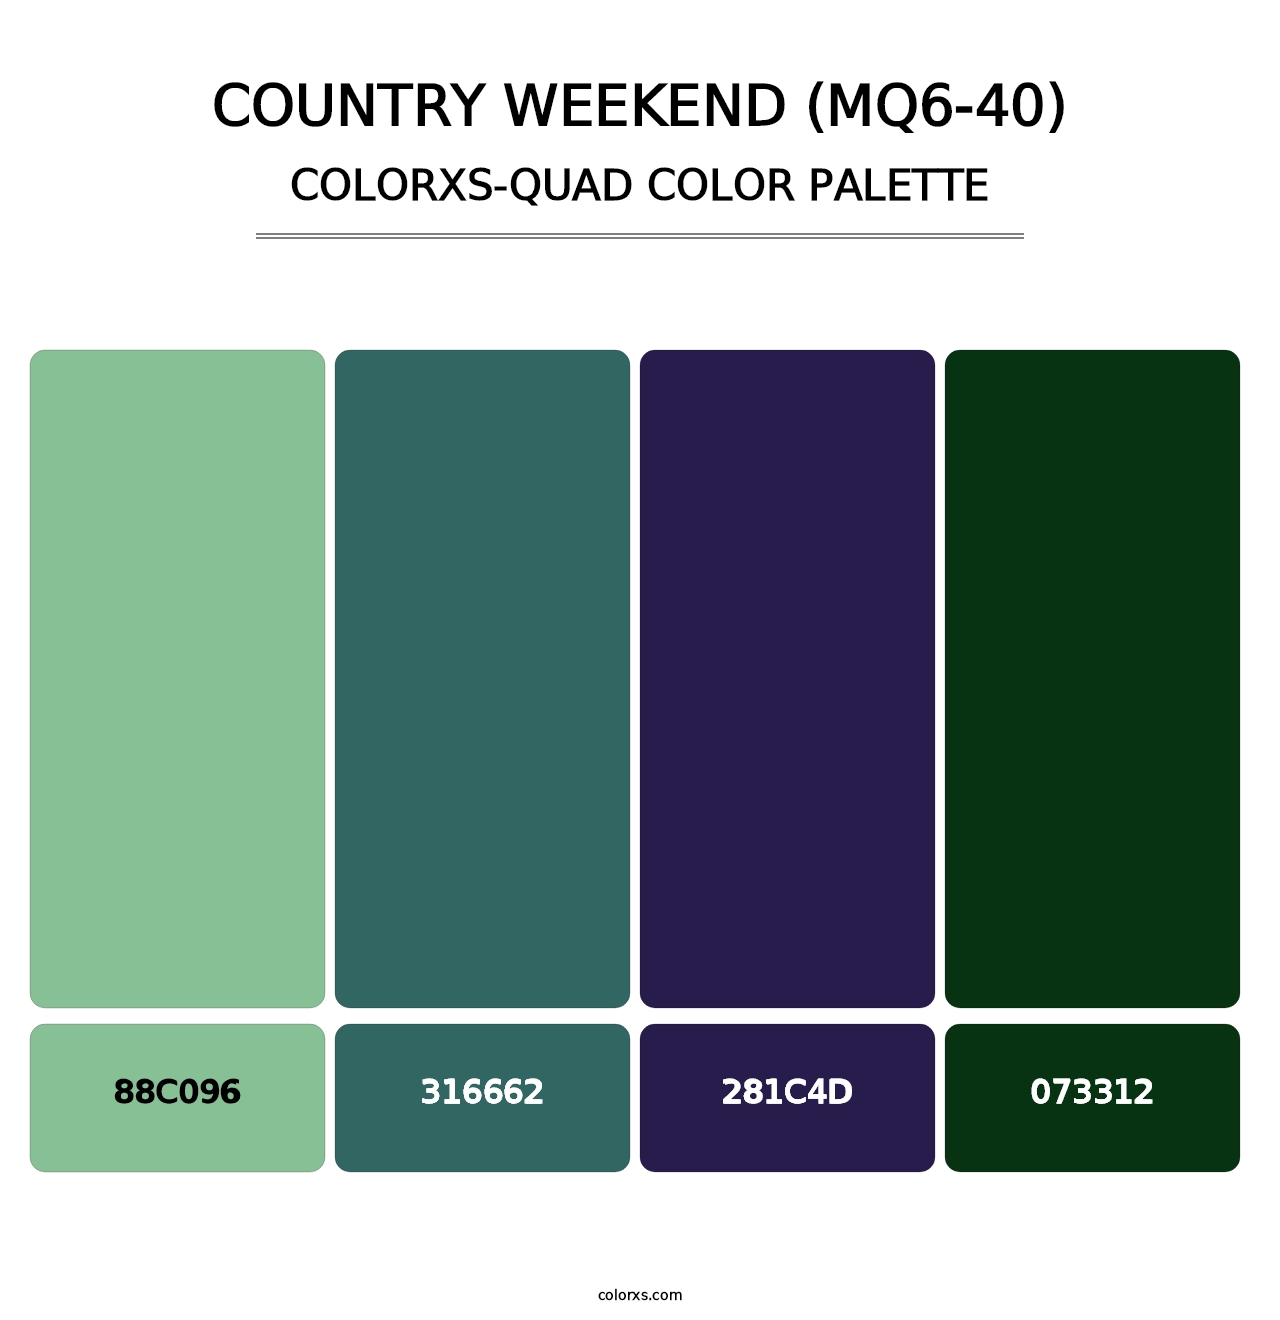 Country Weekend (MQ6-40) - Colorxs Quad Palette